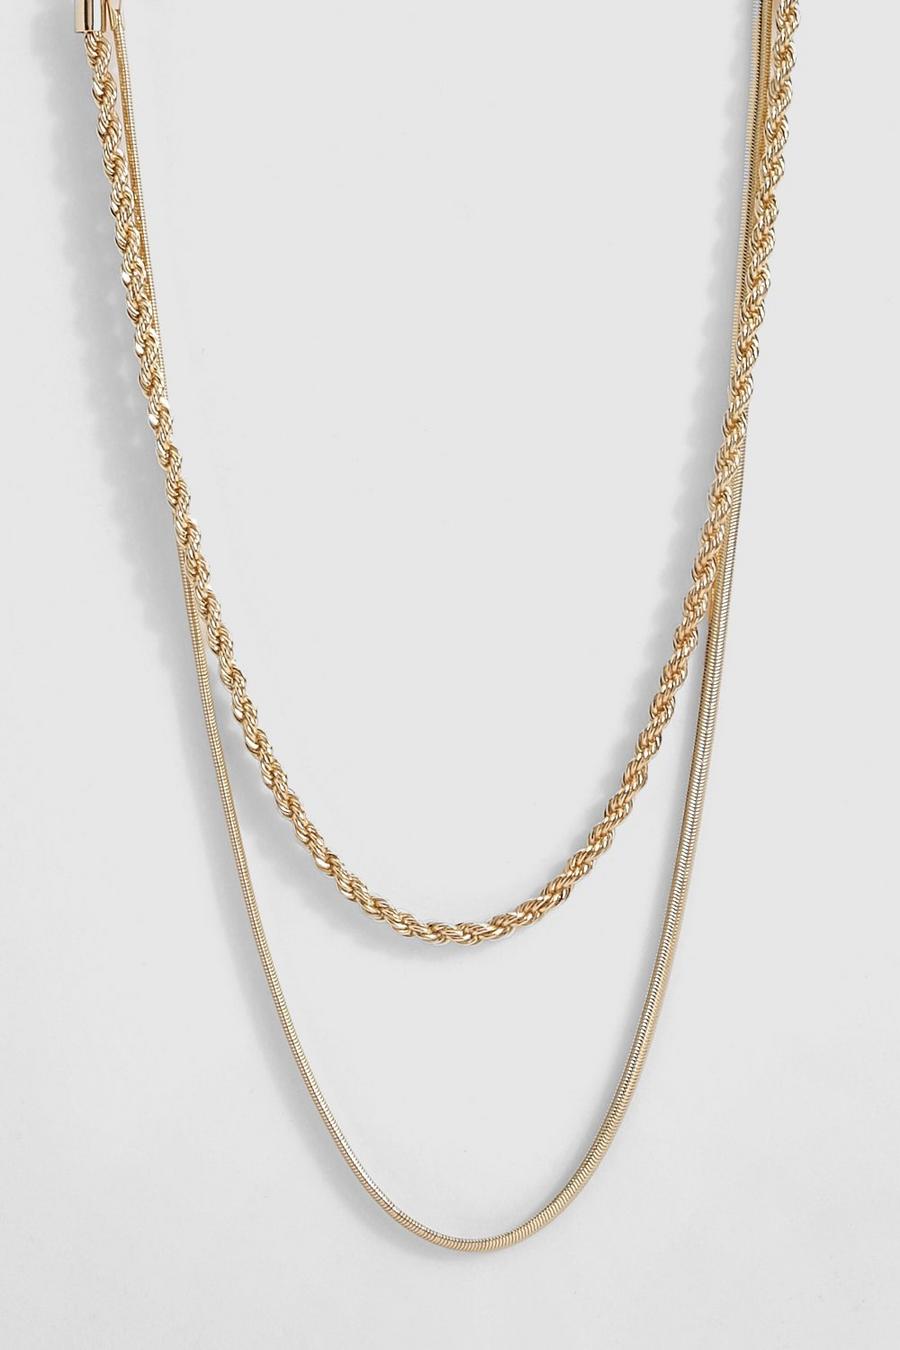 Gold Green Stone Drop Chain Necklace